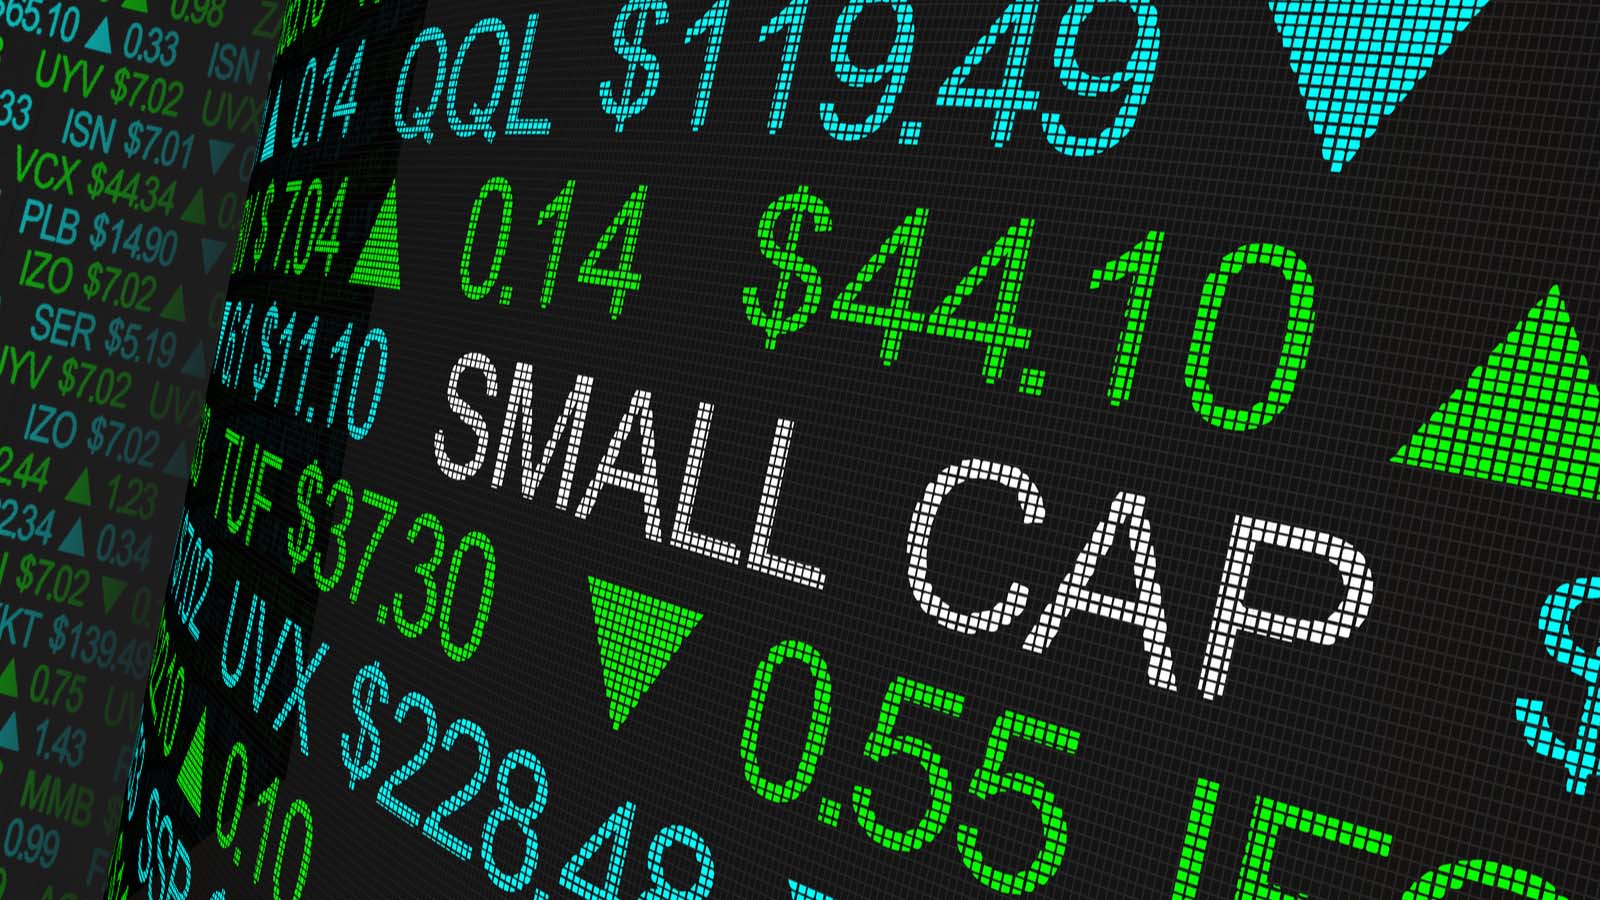 small-cap stocks: a ticker board that says "SMALL CAP" among various ticker increases. represents small-cap stocks to buy